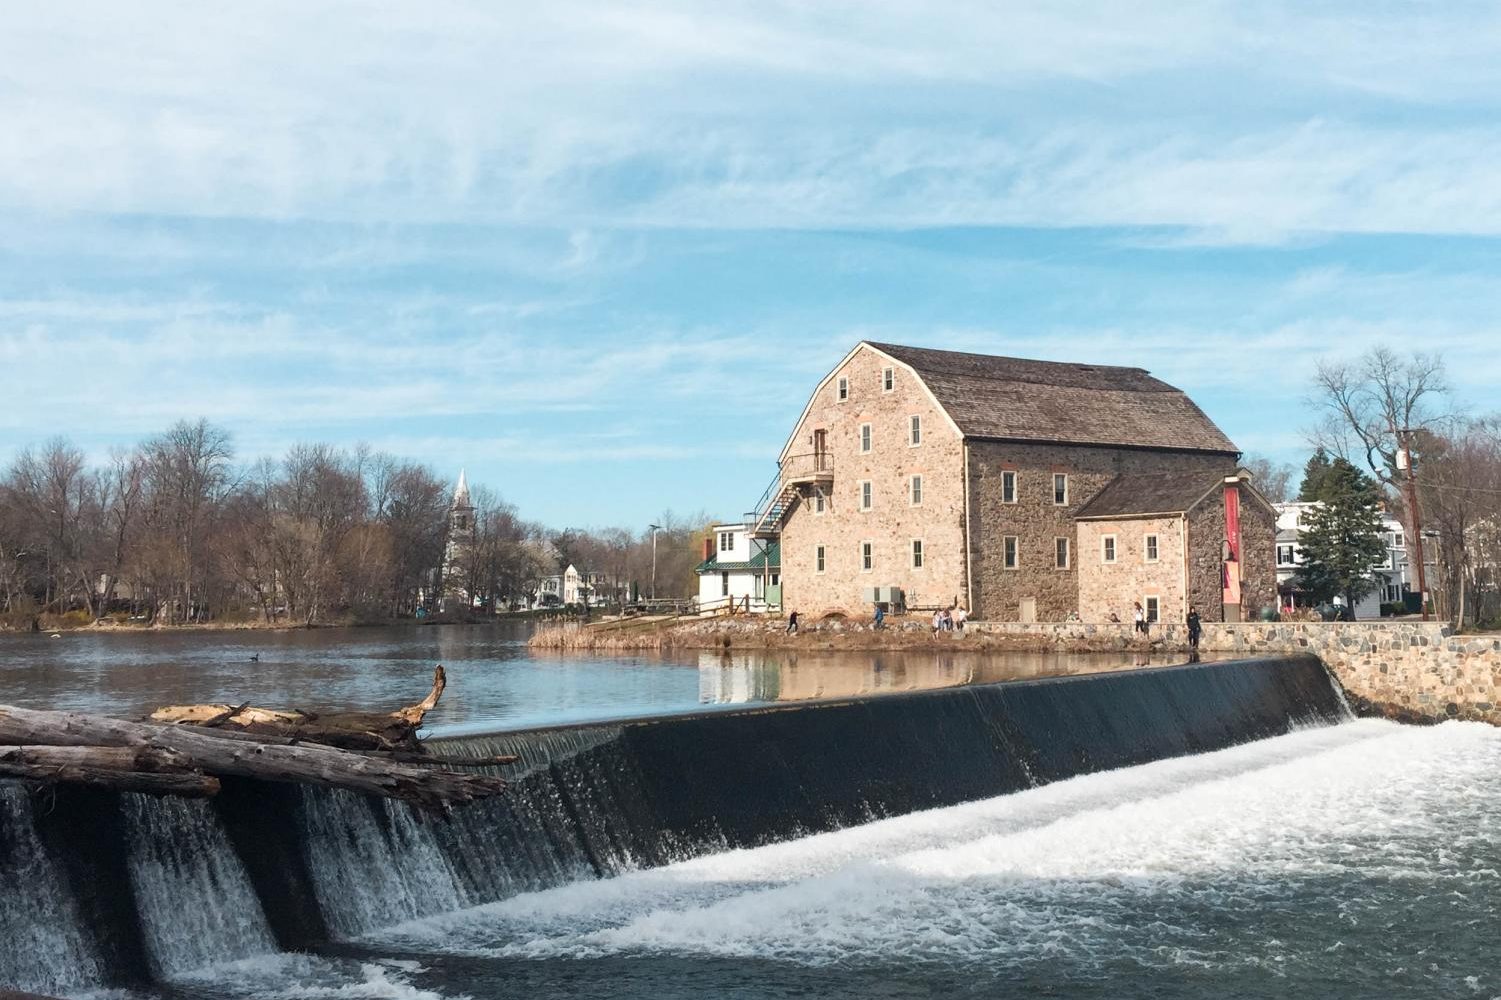 The Raritan River runs through Clinton, providing a picturesque setting for the town. Children are often seen feeding ducks, and you can eat at a cafe right by the water as well.